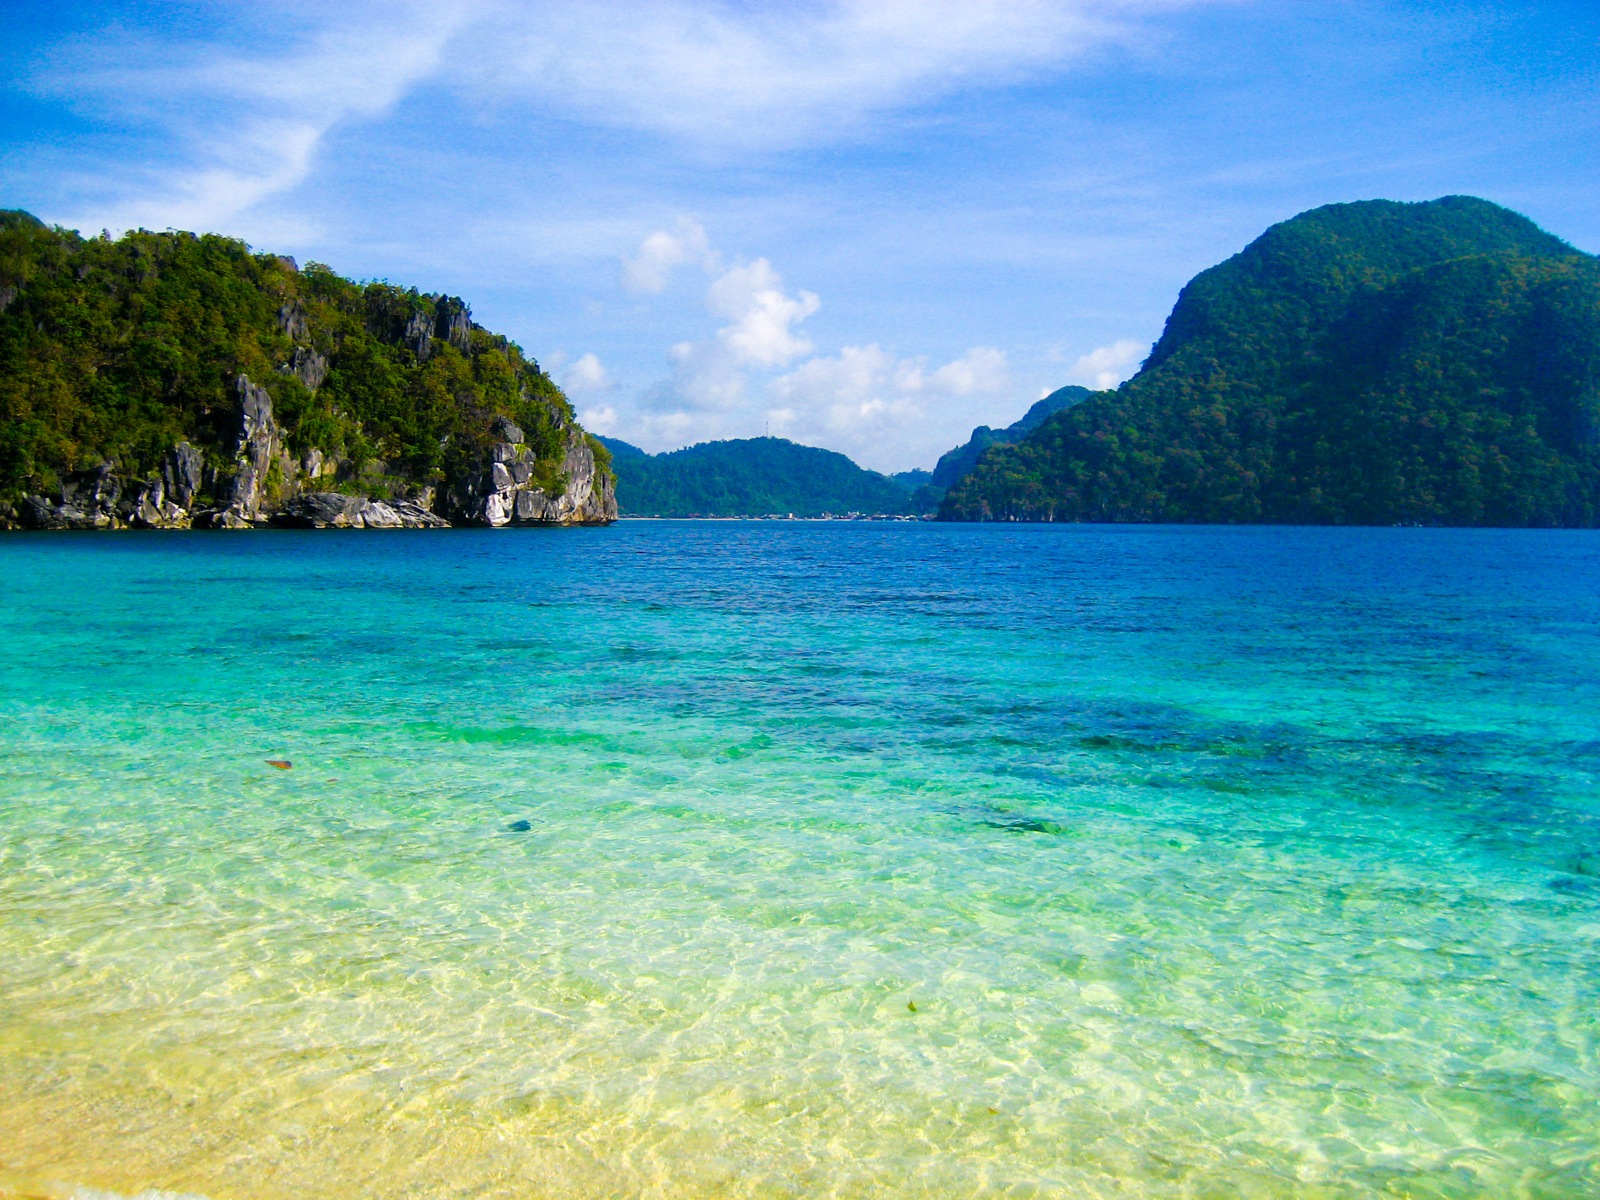 Palawan Island in the Philippines voted best in the world 